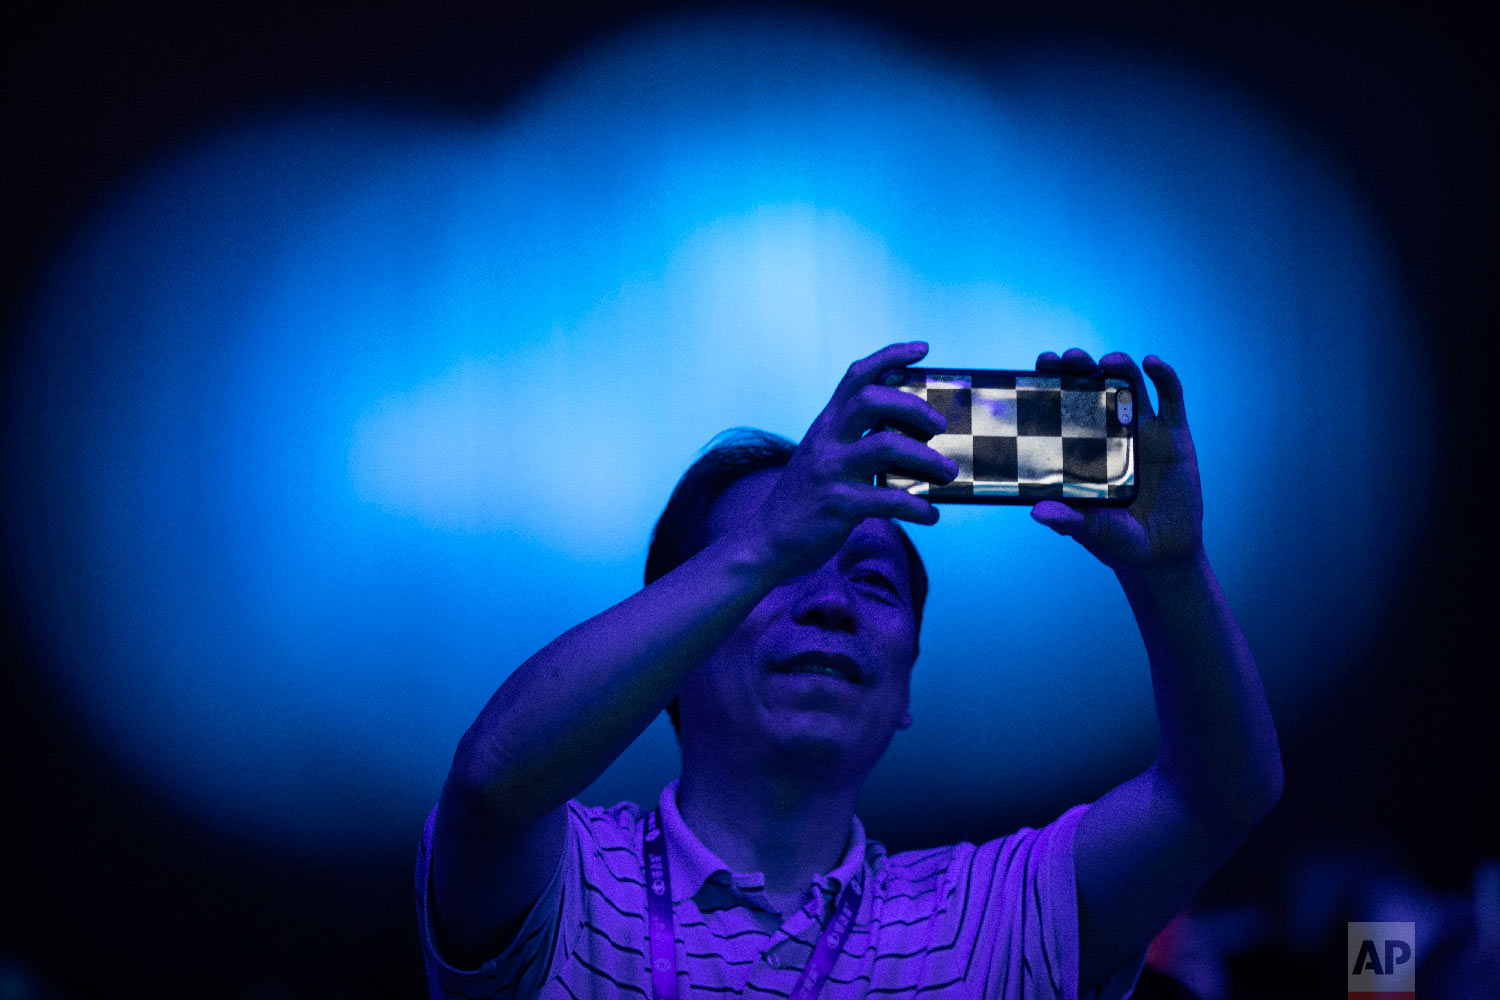  A spectator takes a cellphone photo of the CHAIN Cup at the China National Convention Center in Beijing, Saturday, June 30, 2018. A computer running artificial intelligence software defeated two teams of human doctors in accurately recognizing malad